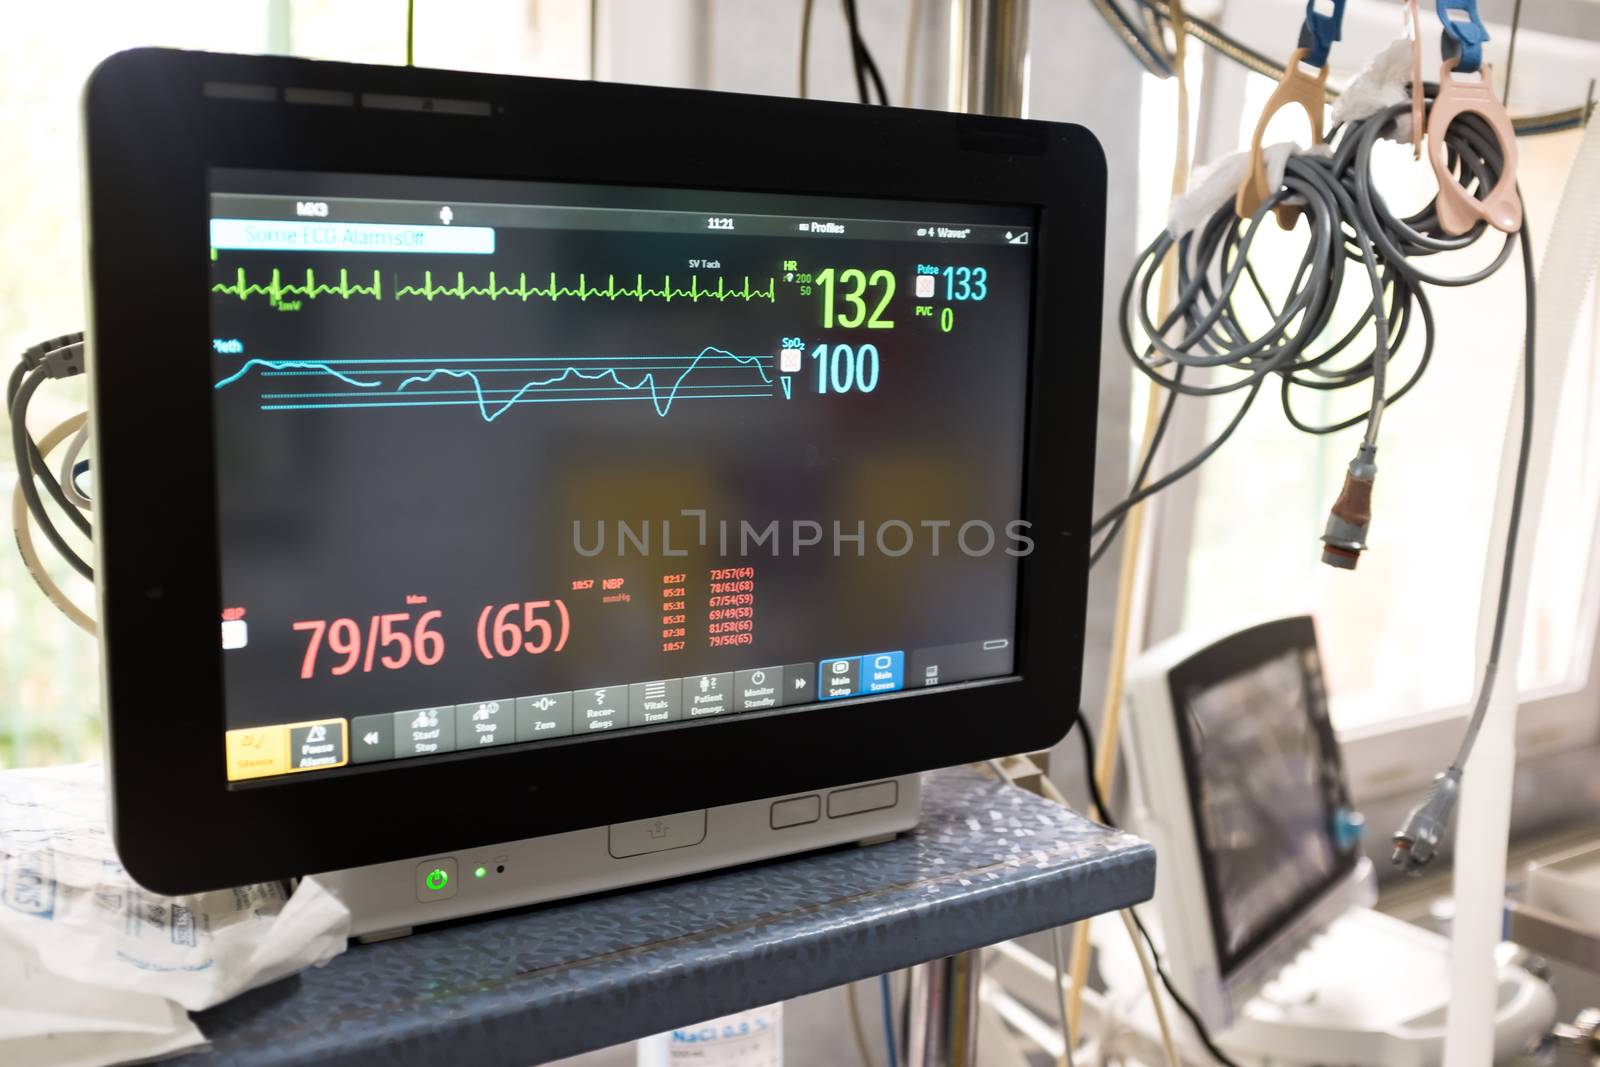 Electrocardiograph (ECG or EKG) unit in a hospital emergency room, black monitor screen showing heart rate & pulse,COVID-19 coronavirus USA pandemic healthcare crisis,high death toll & mortality rate